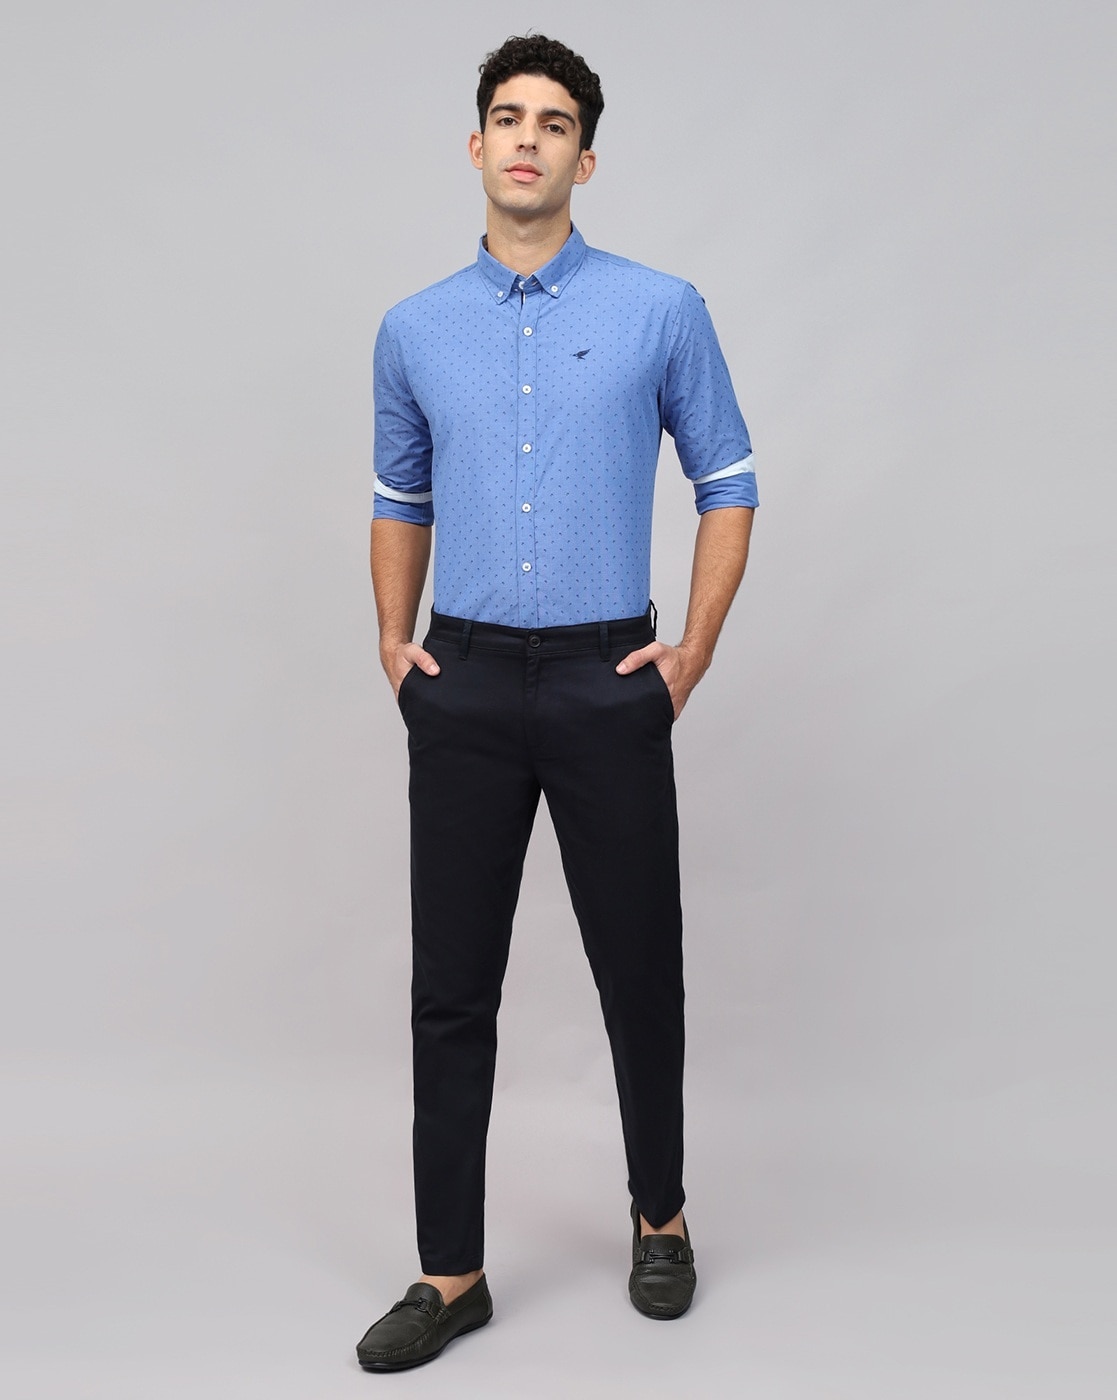 Best Men's Slim Fit Oxford Blue Dress Shirt Outfits | Blue Shirt  Combination Casual Outfits… | Mens business casual outfits, Formal men  outfit, Mens clothing styles